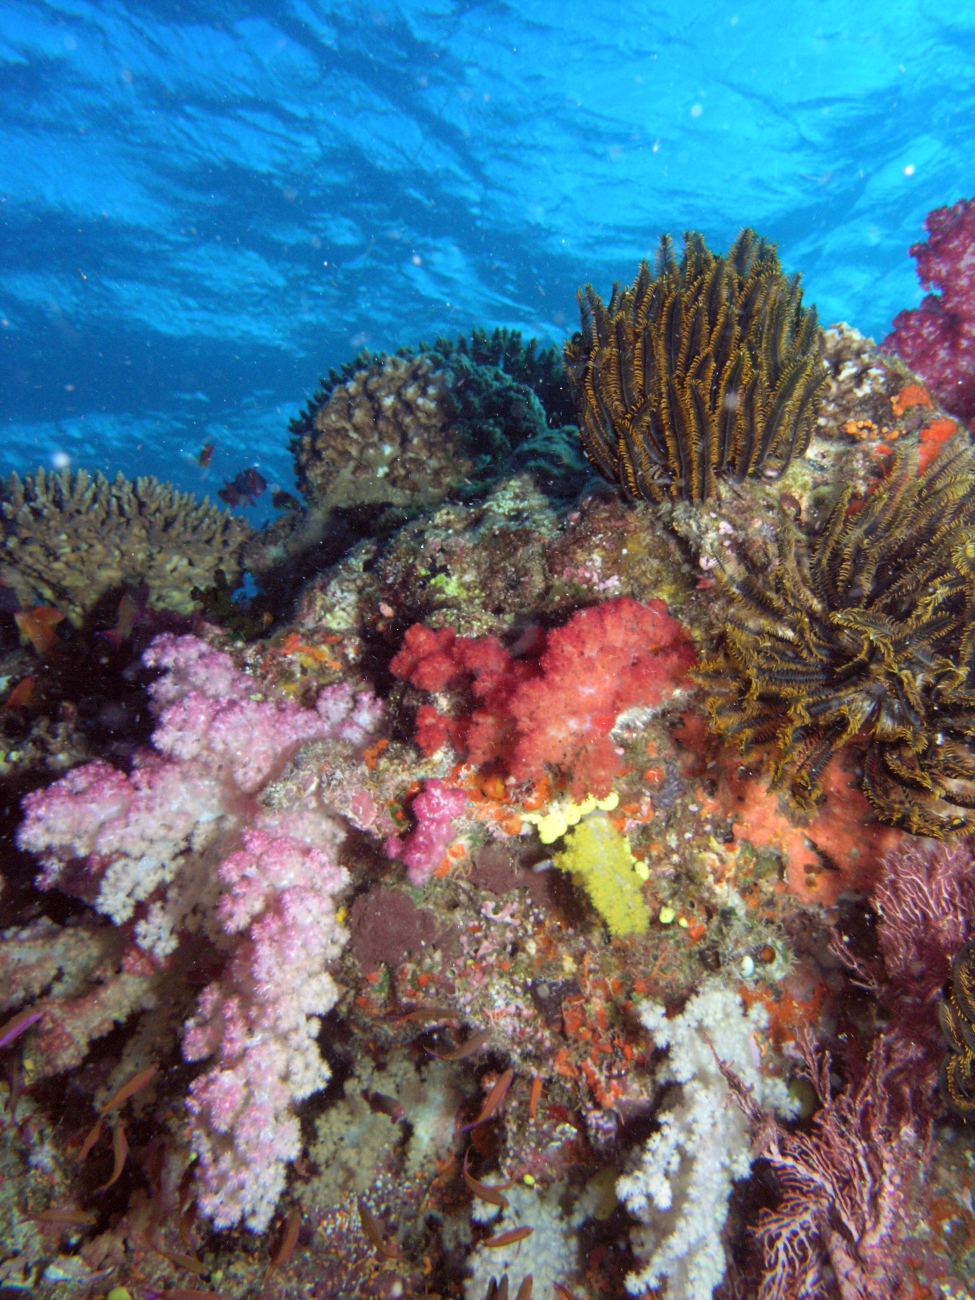 Reef scene with great diversity of coral species